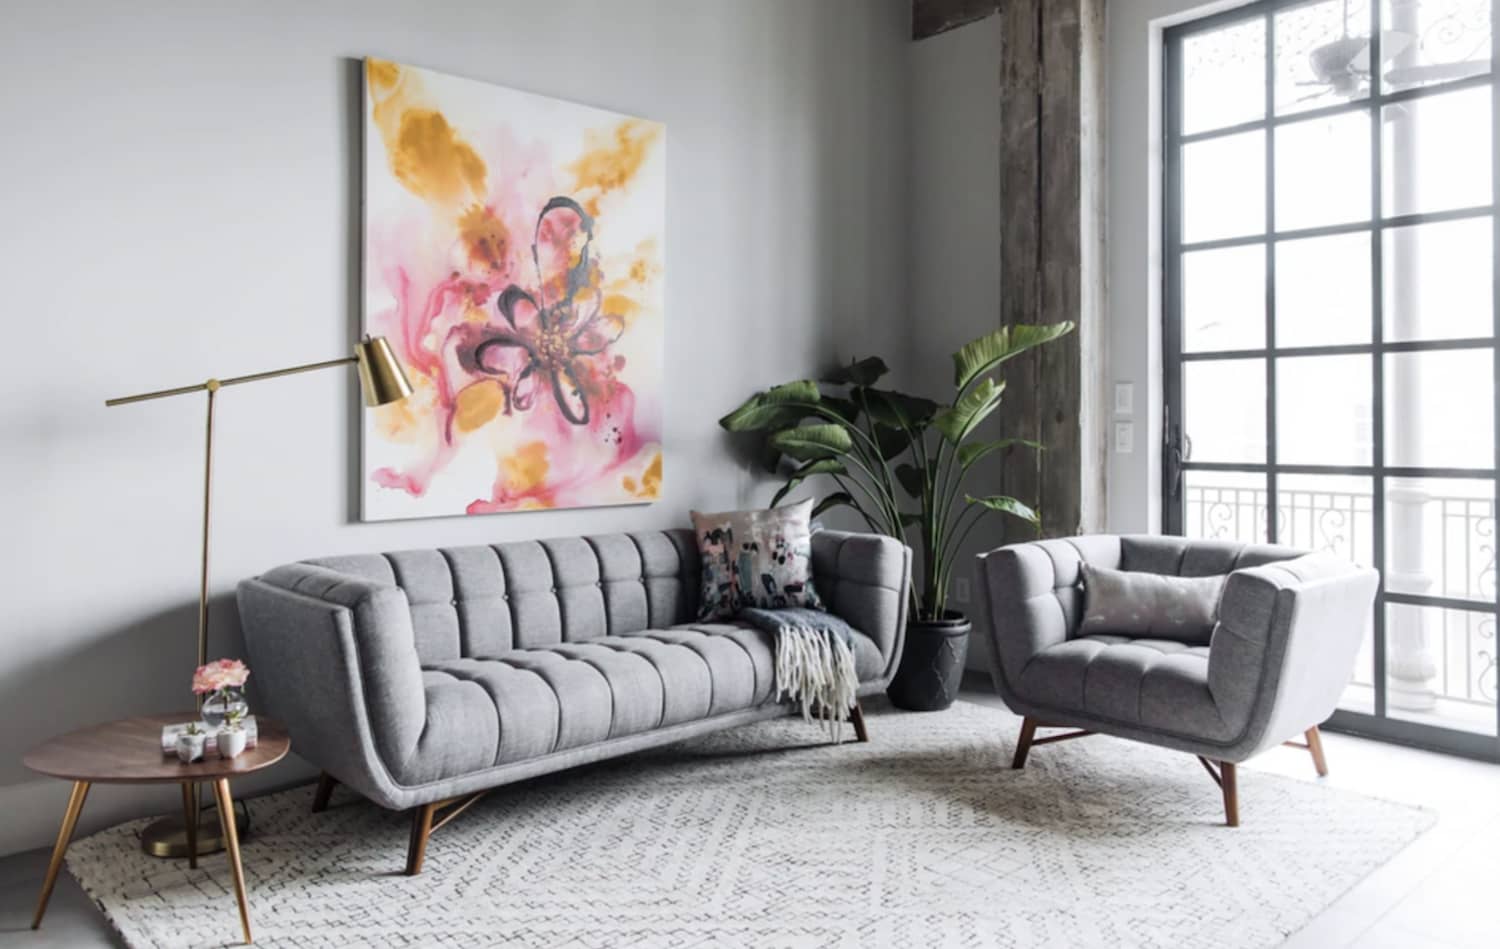 The Sister Site of One of Our Favorite Furniture Brands Is Having a Huge Sale on Sofas, Beds, and Dining Tables